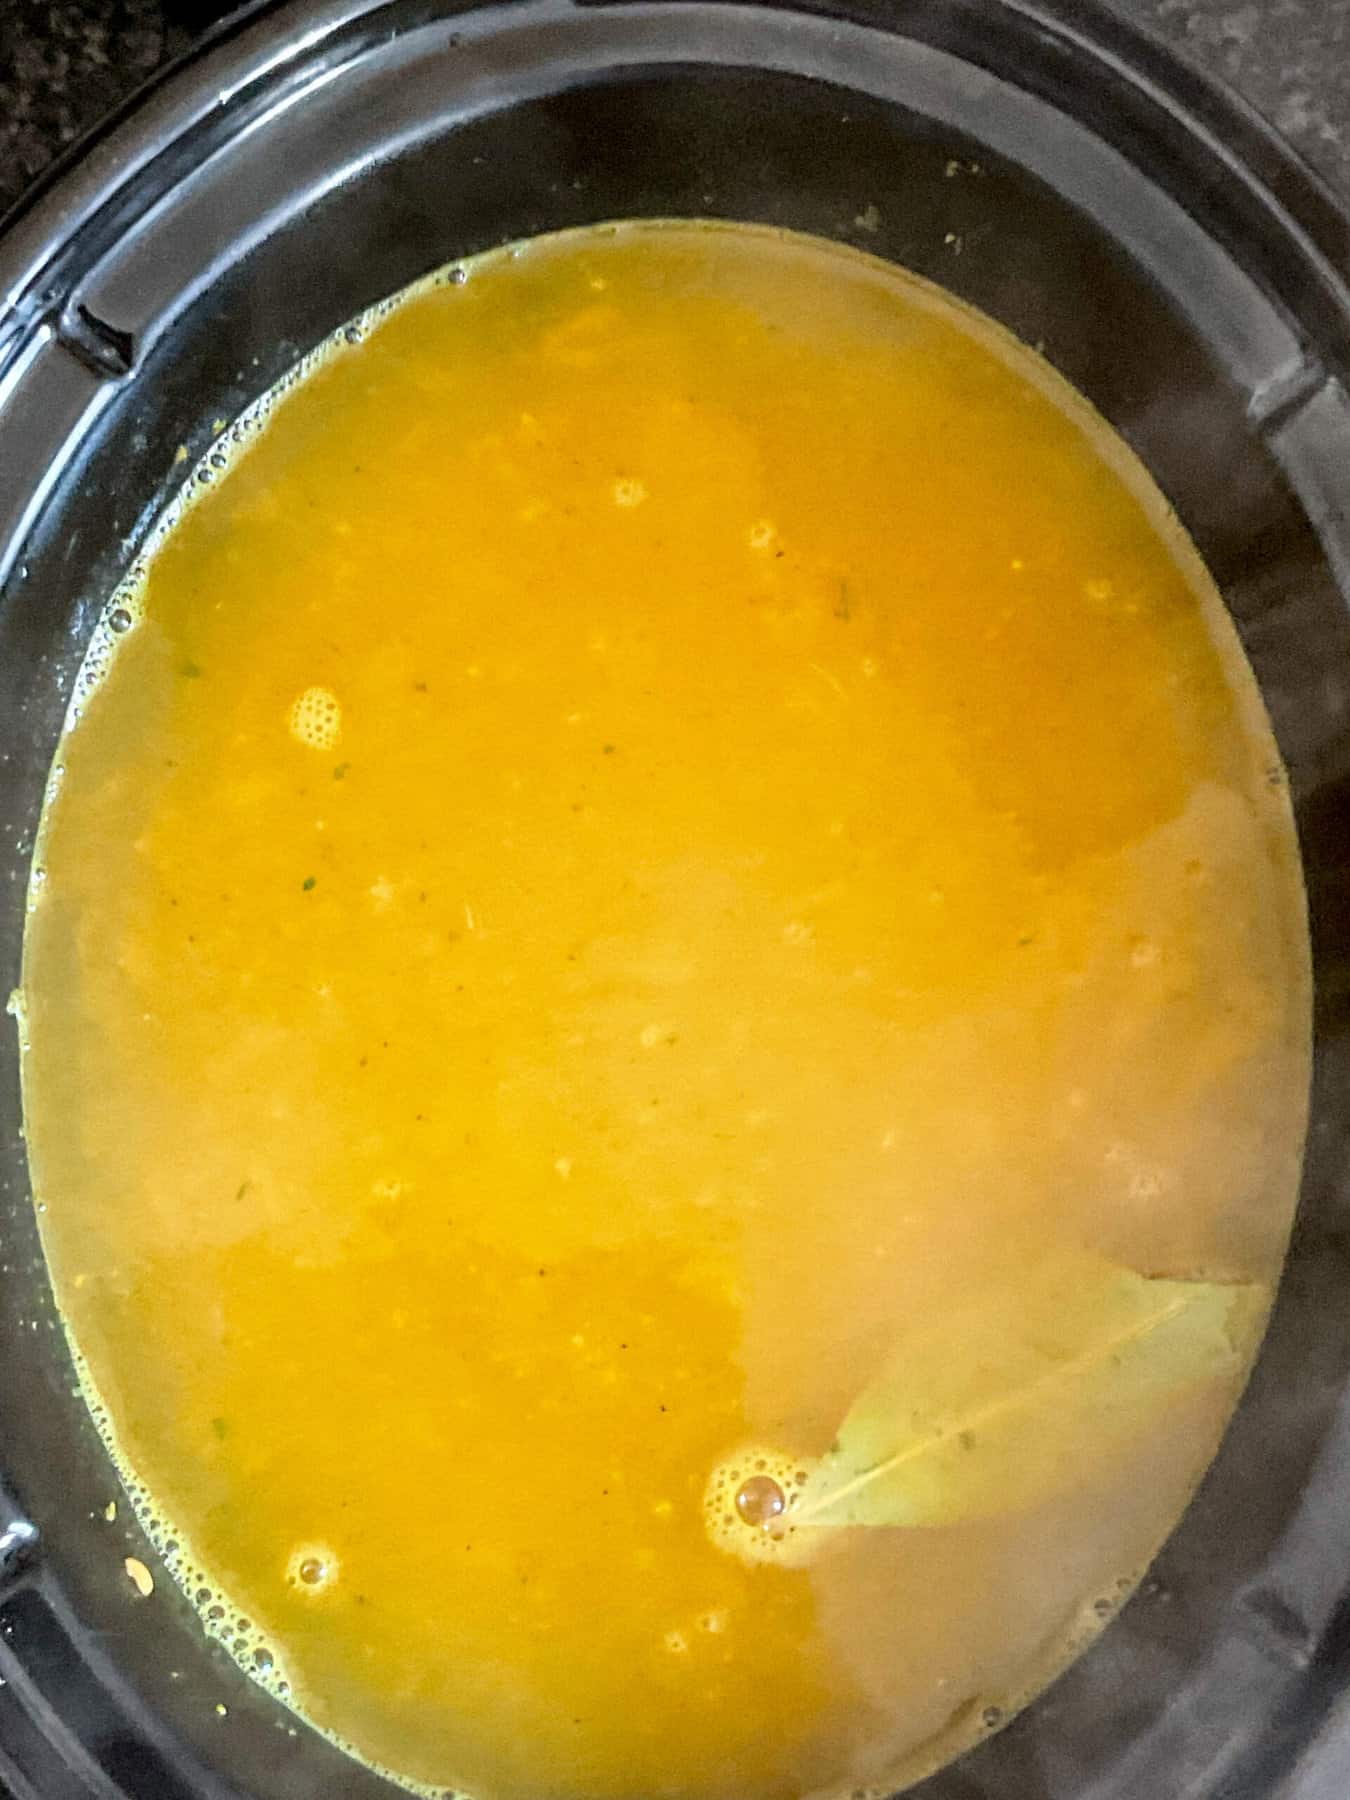 Vegetable stock poured into the slow cooker with red lentil dal ingredients.